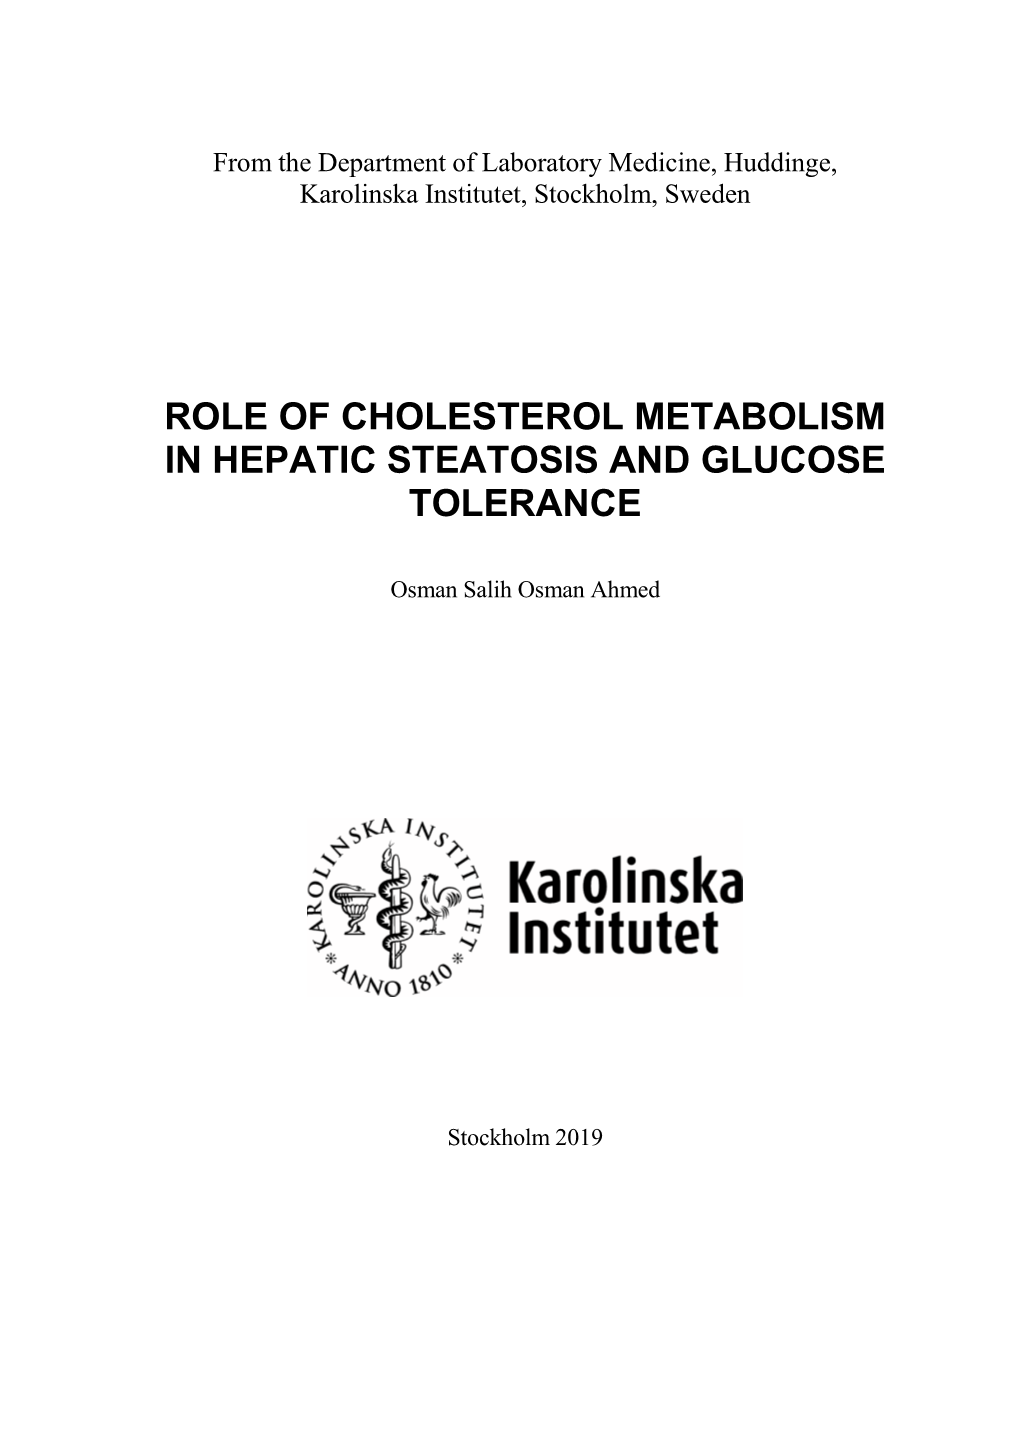 Role of Cholesterol Metabolism in Hepatic Steatosis and Glucose Tolerance